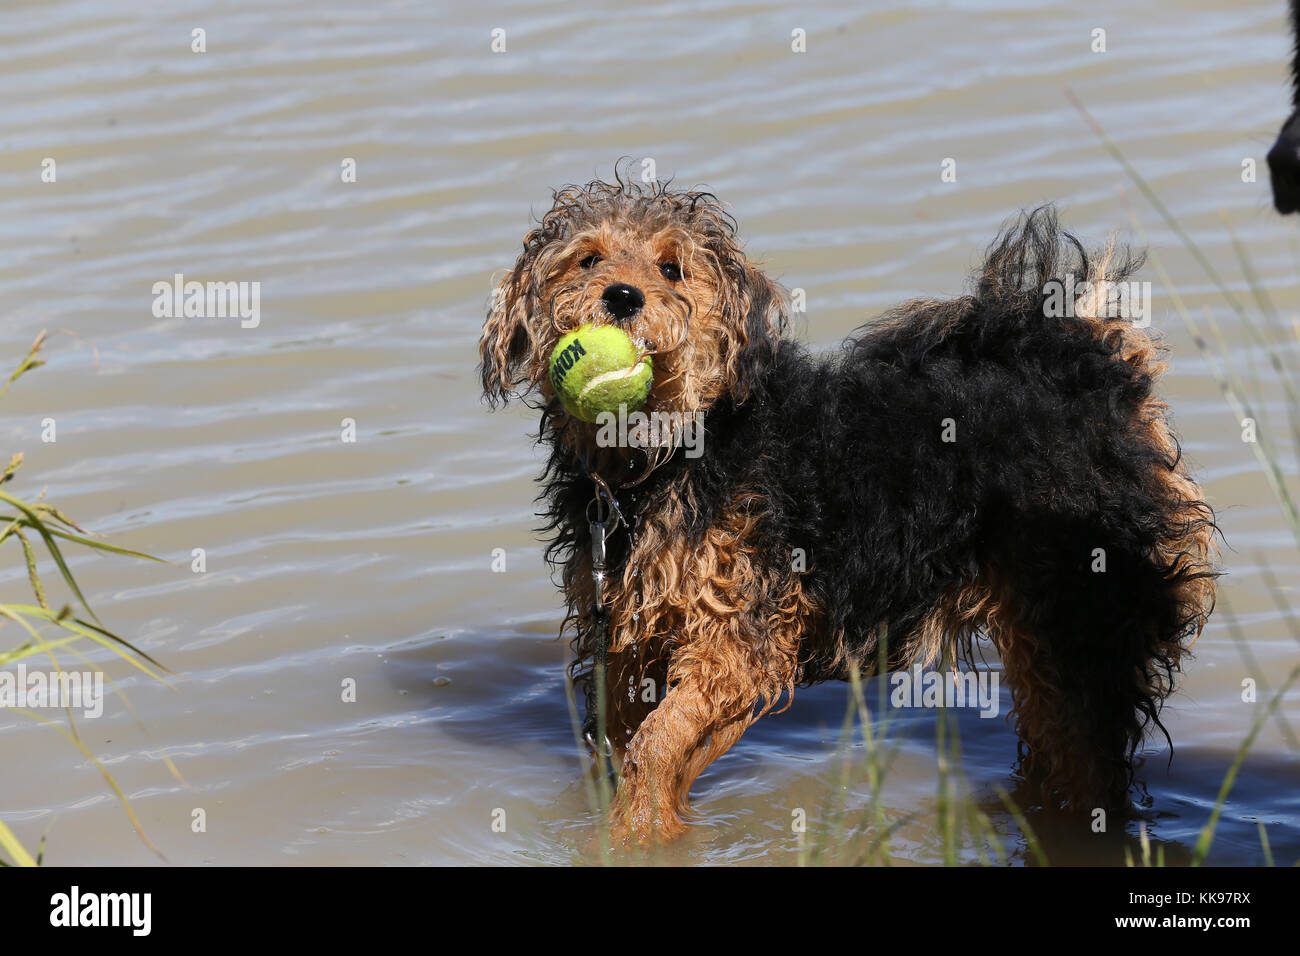 Welsh Terrier 8 month old dog standing in shallow water with ball in mouth looking at camera with paw raised Stock Photo